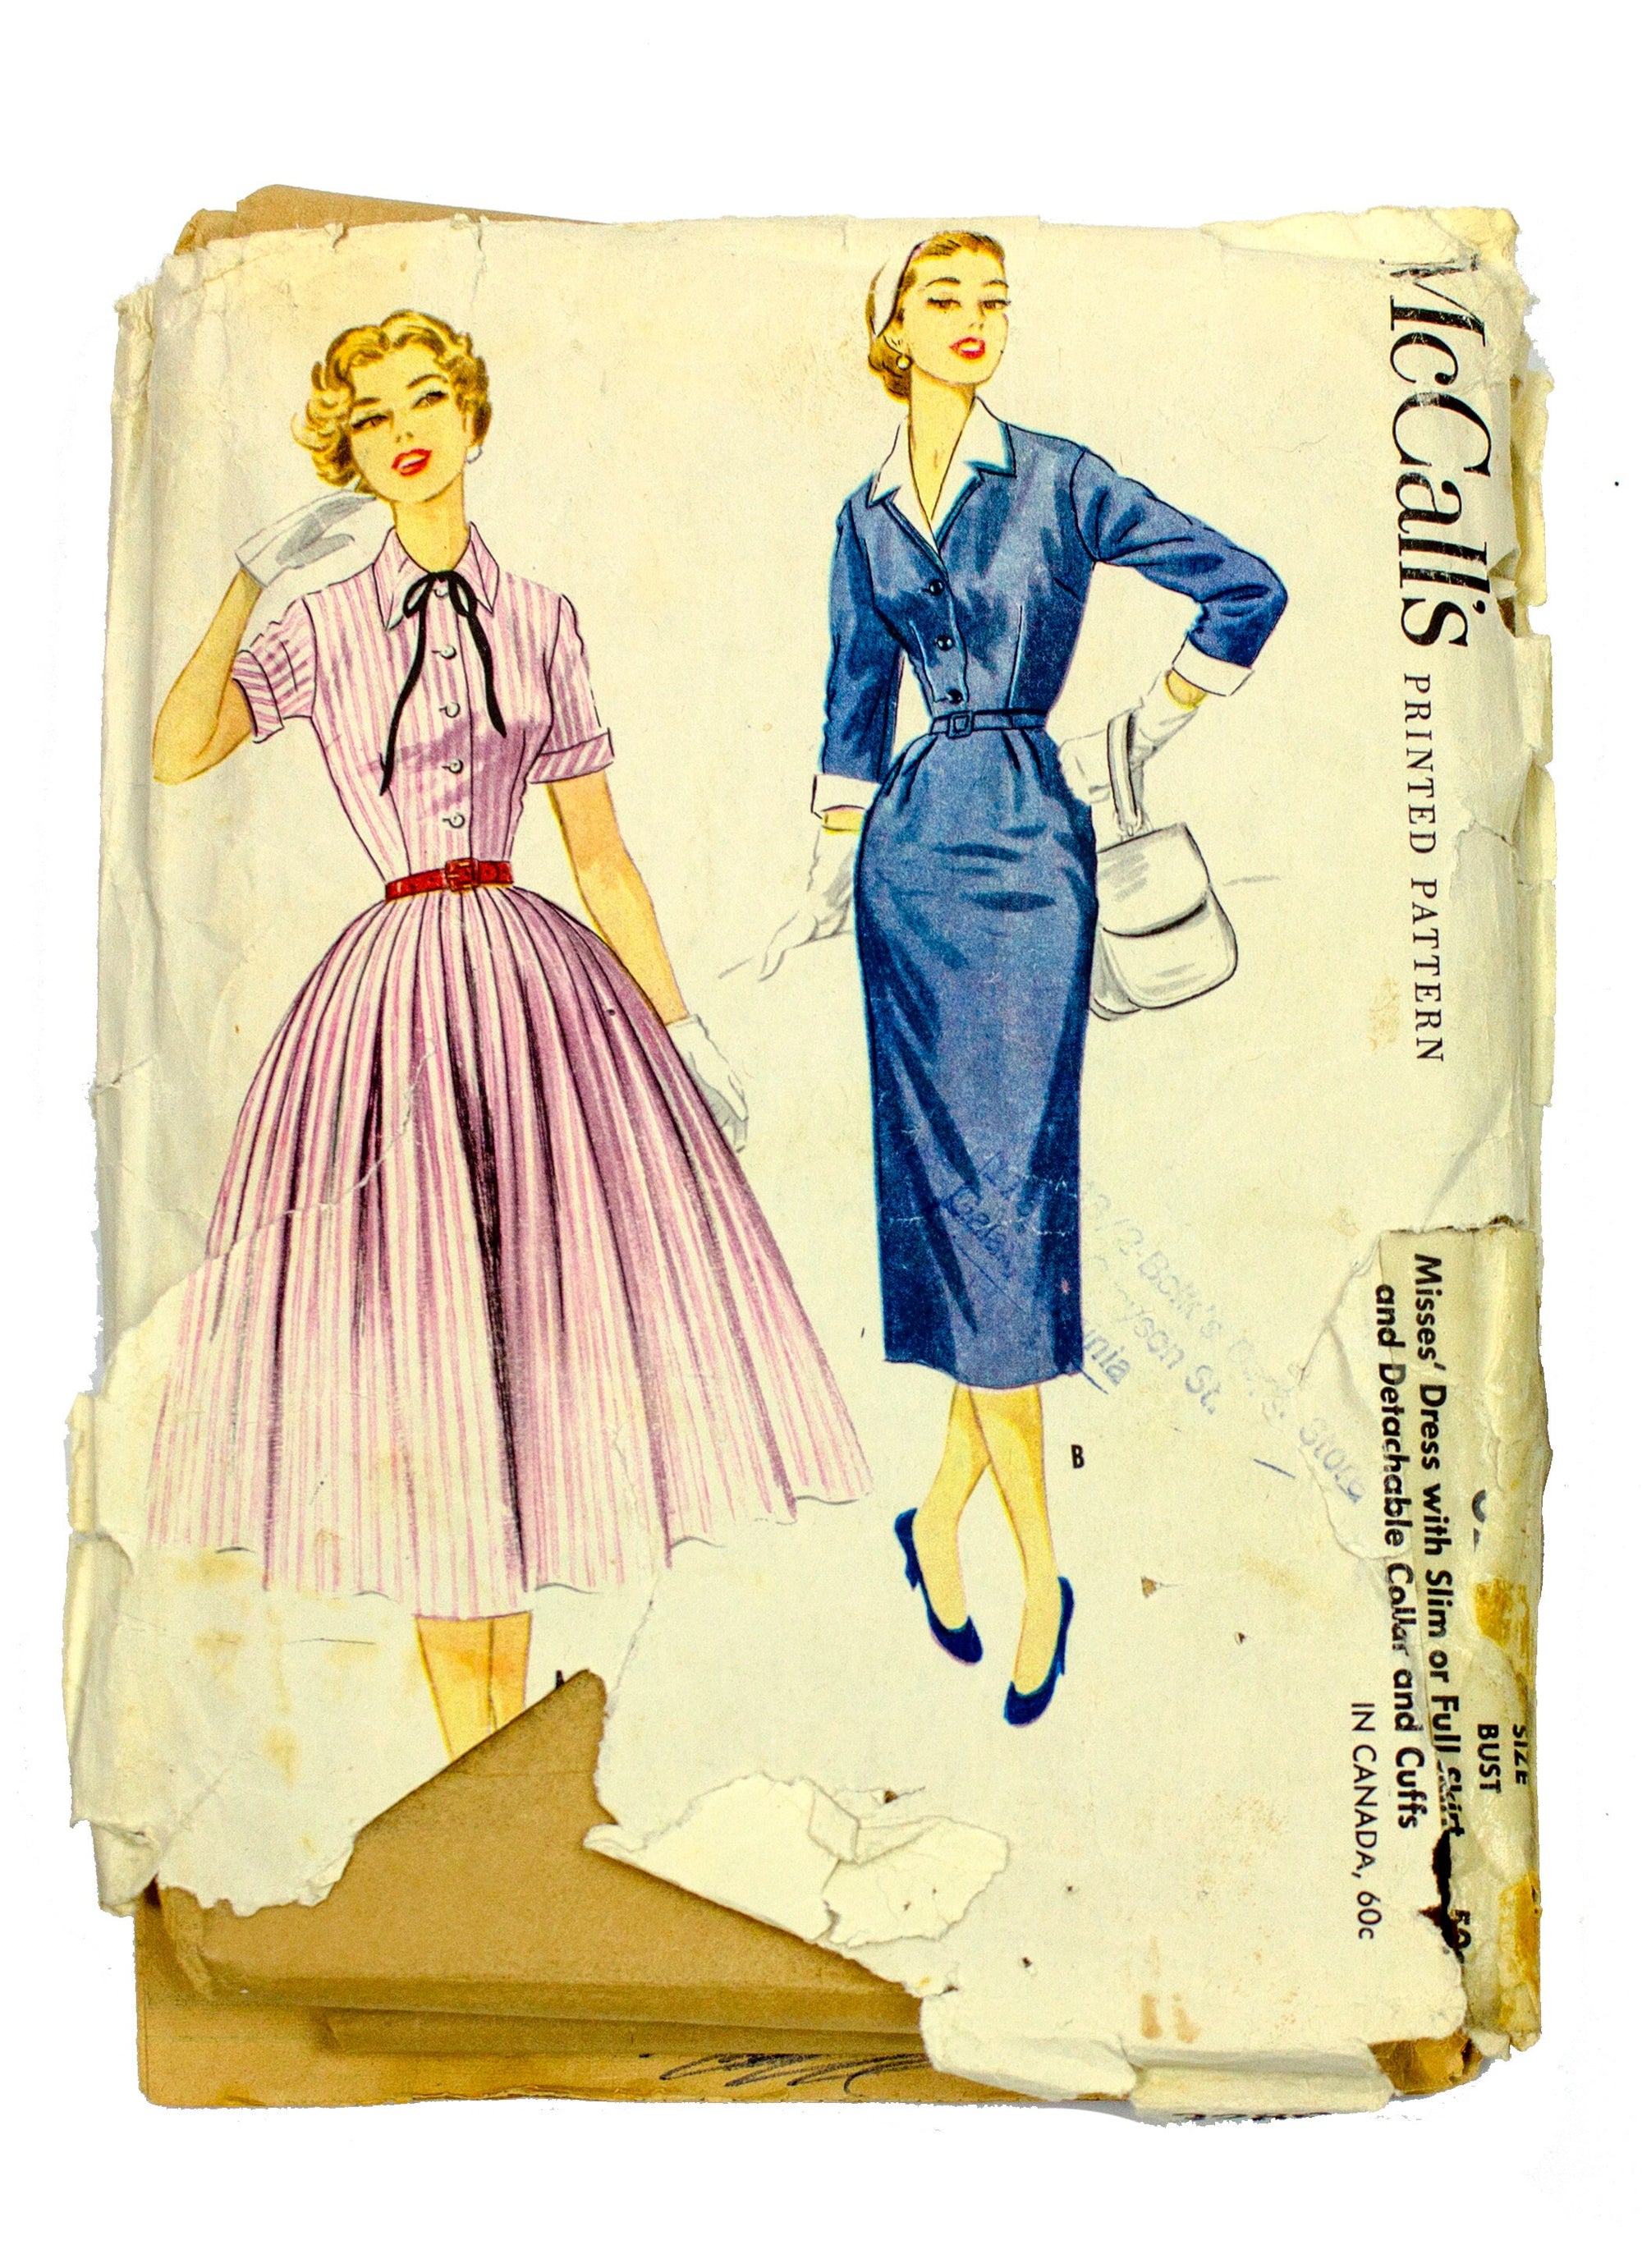 McCall's 3289 Women's Dress with Detachable Cuffs and Collar Dated 1955 - Size 12